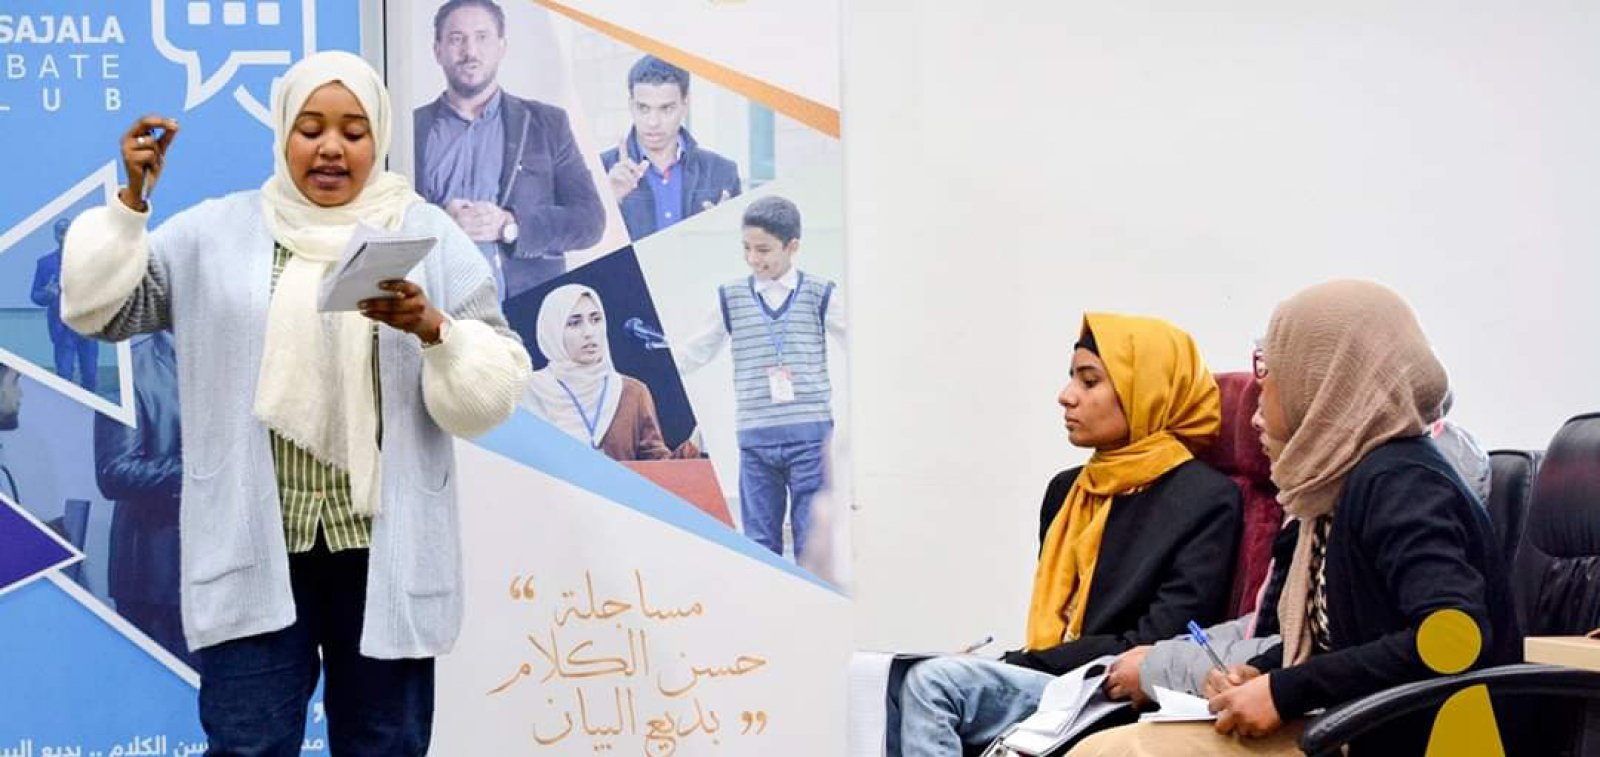 Youth Voice of Change in Libya